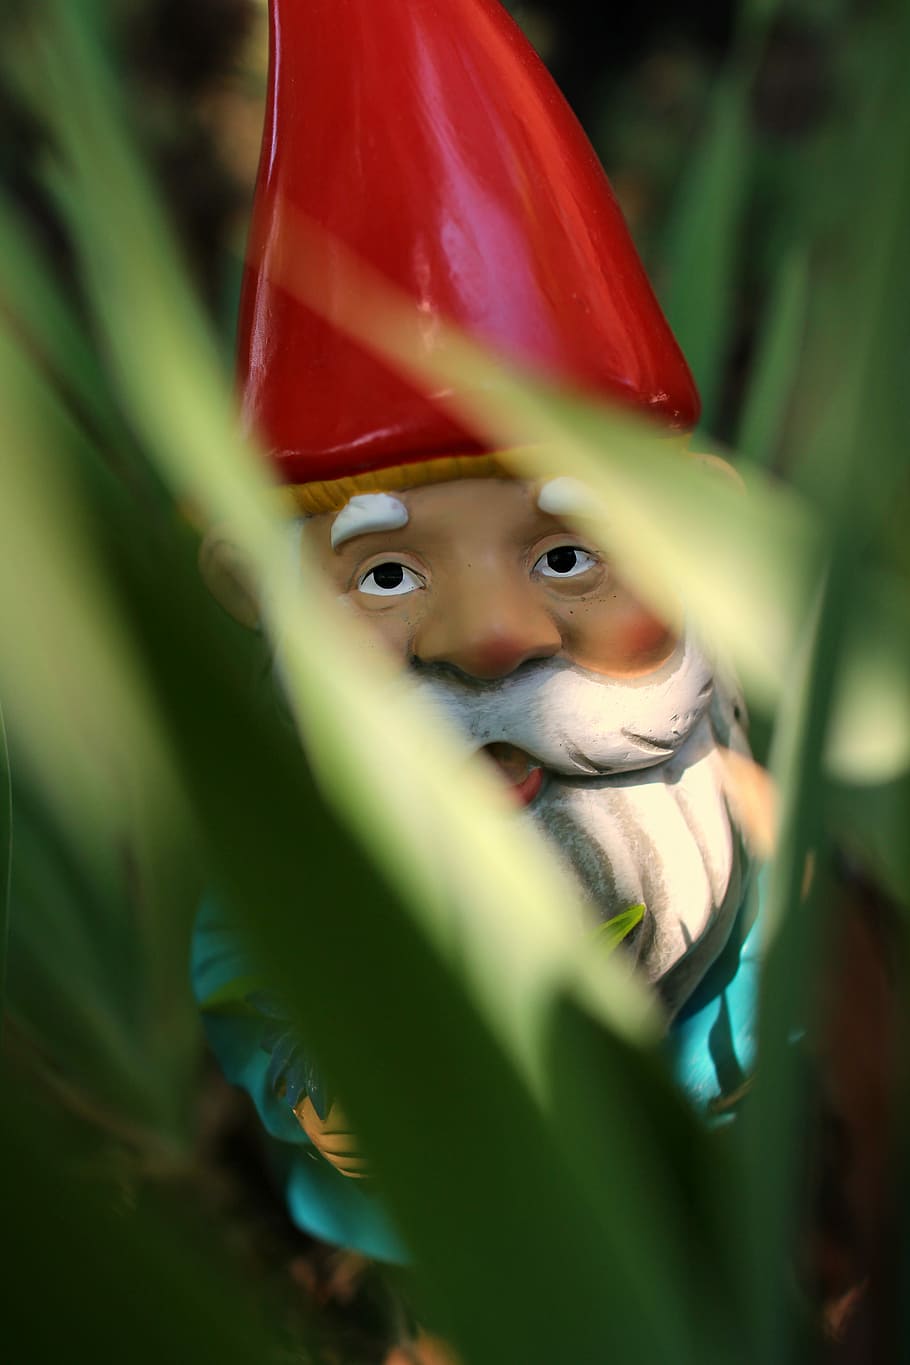 HD wallpaper: gnome standing on green grass during daytime, shallow focus  of garden gnome figurine | Wallpaper Flare